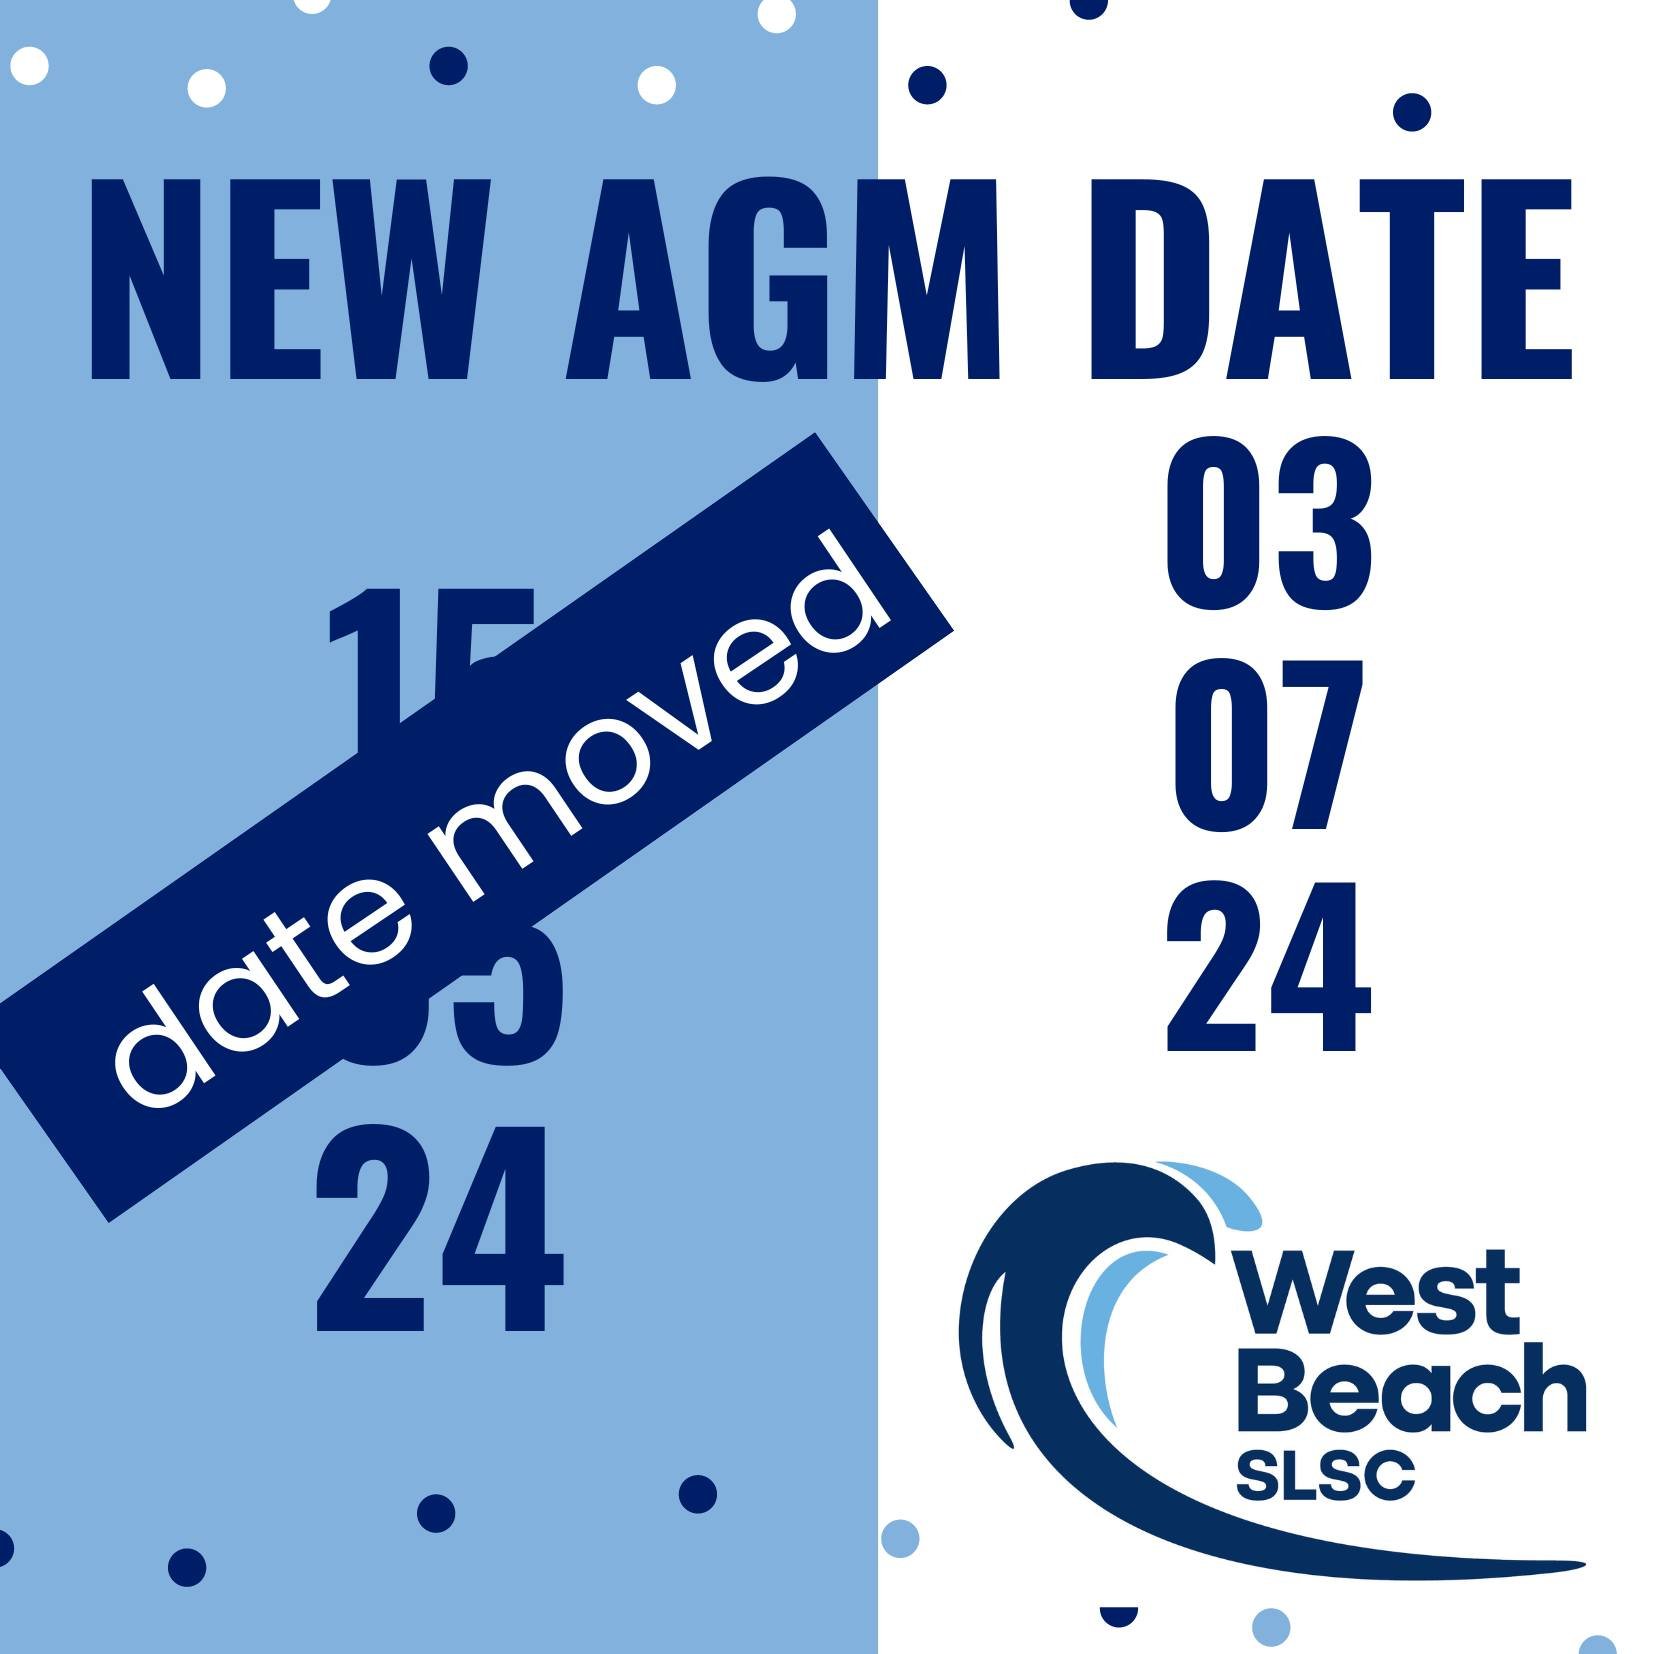 Just a reminder to change your diary - the AGM has been re-scheduled to Wednesday the 3rd of July. 7pm kickoff.